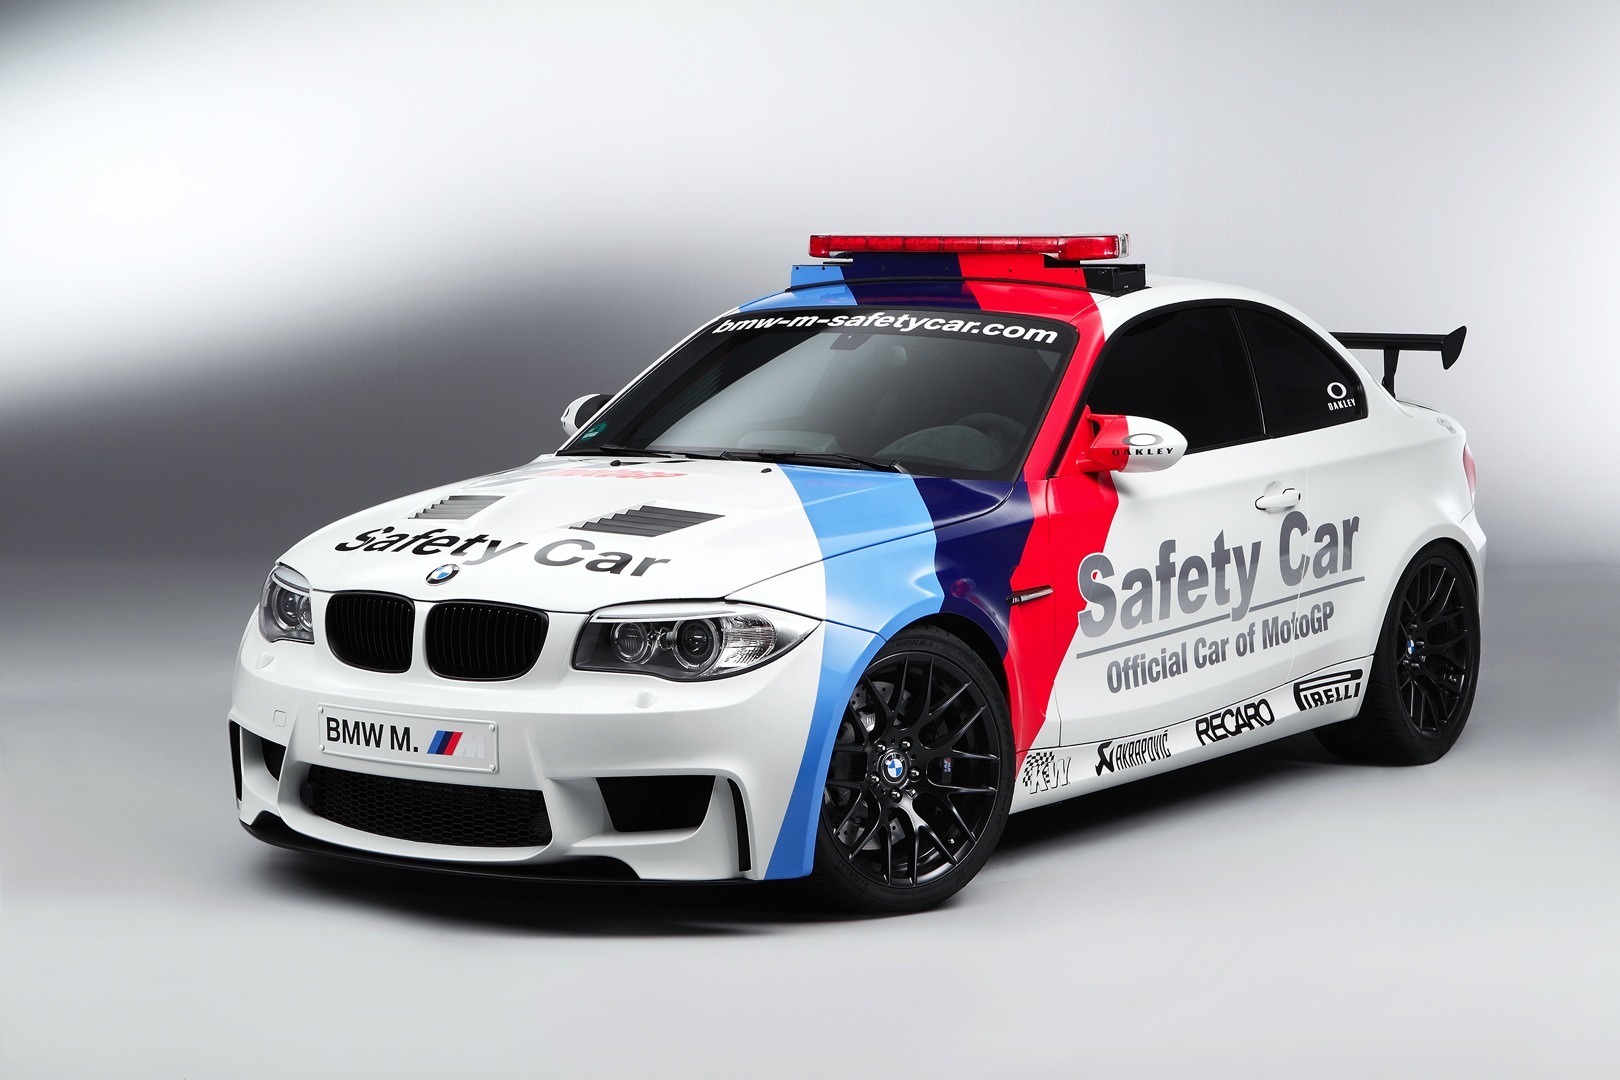 on this topic latest car reviews bmw unveils m4 motogp safety car bmw 